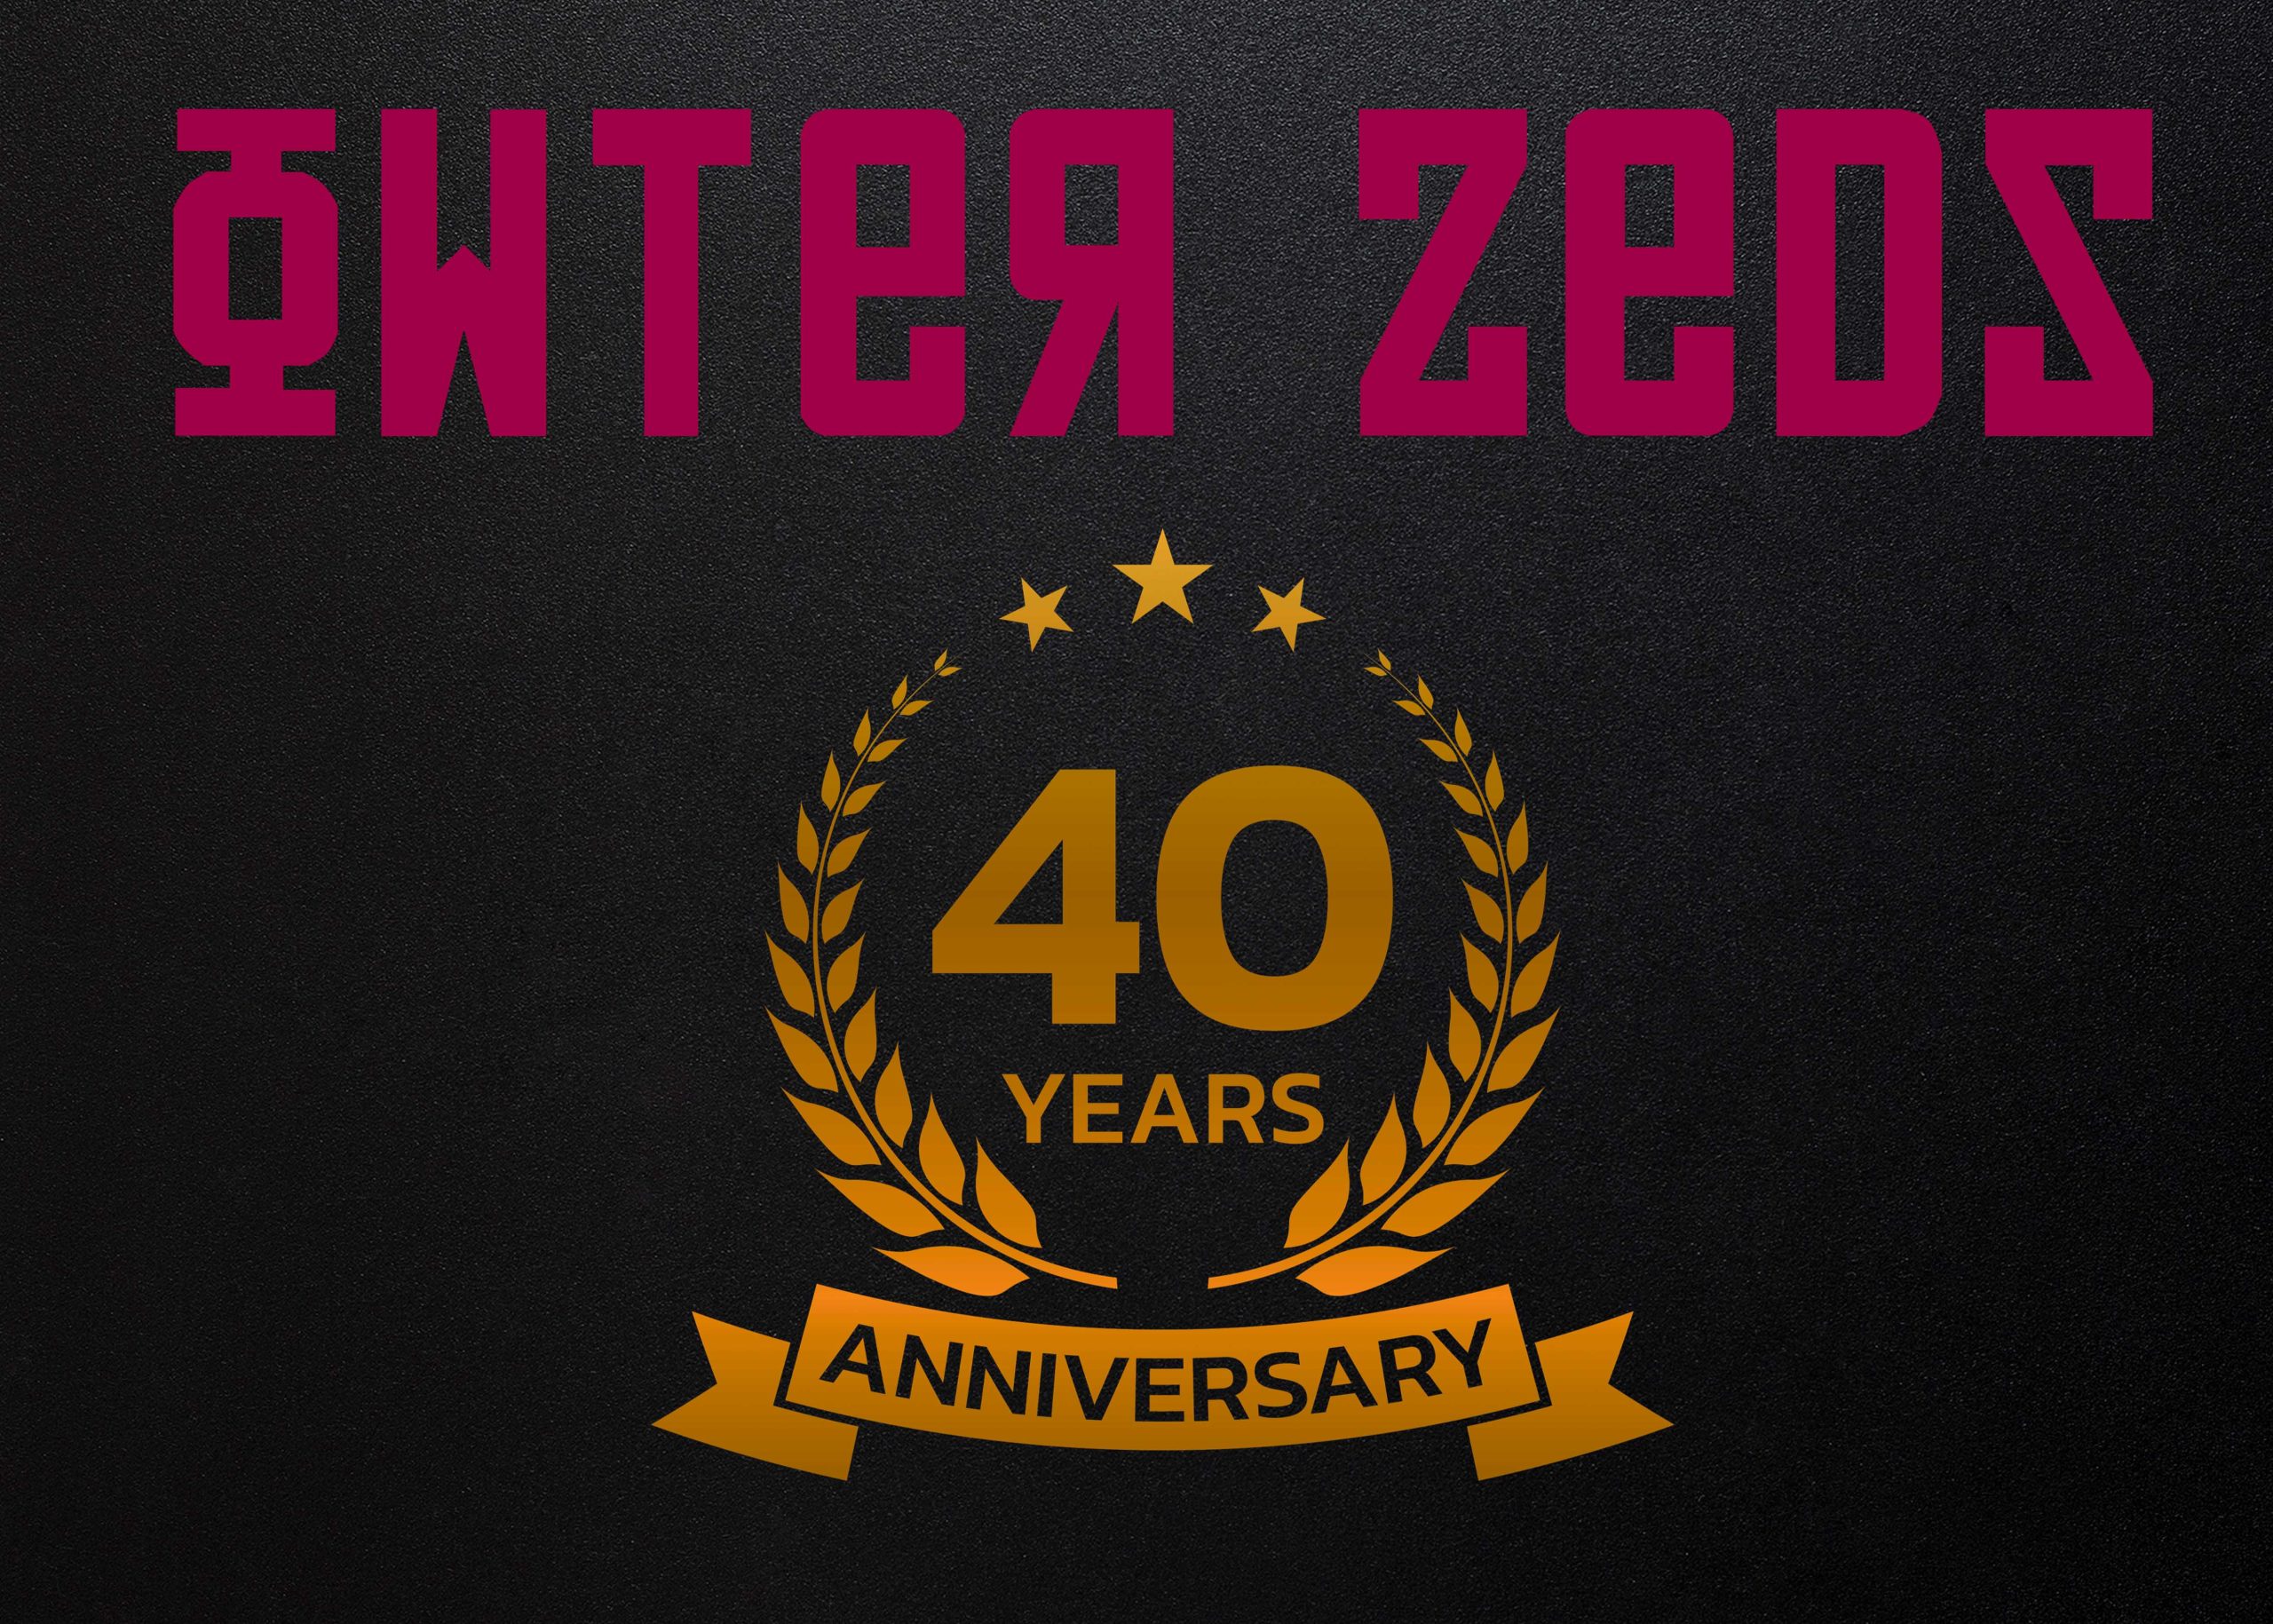 Owter Zeds 40th Anniversary Show